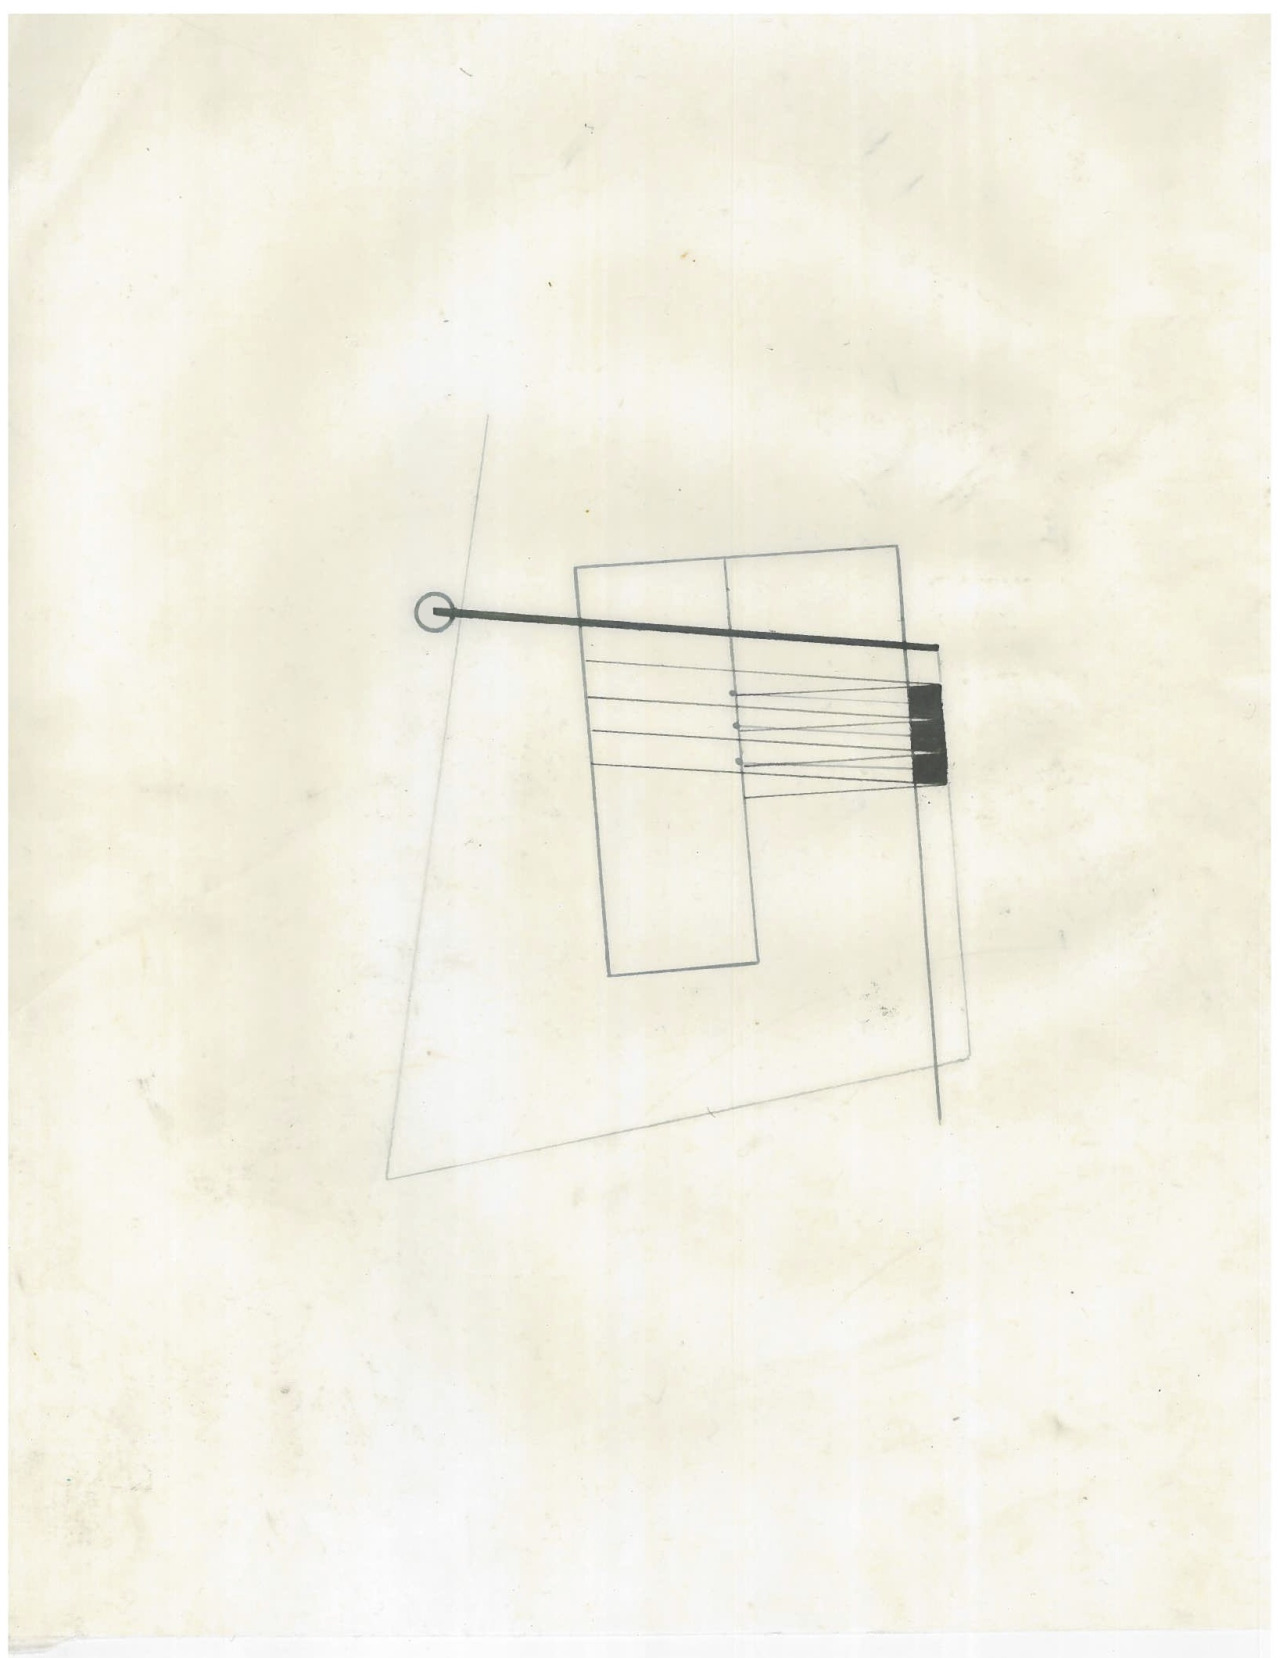 Untitled (the city, observations 17A)  Pencil on oiled fabriano paper  279mm x 216mm  December 2013